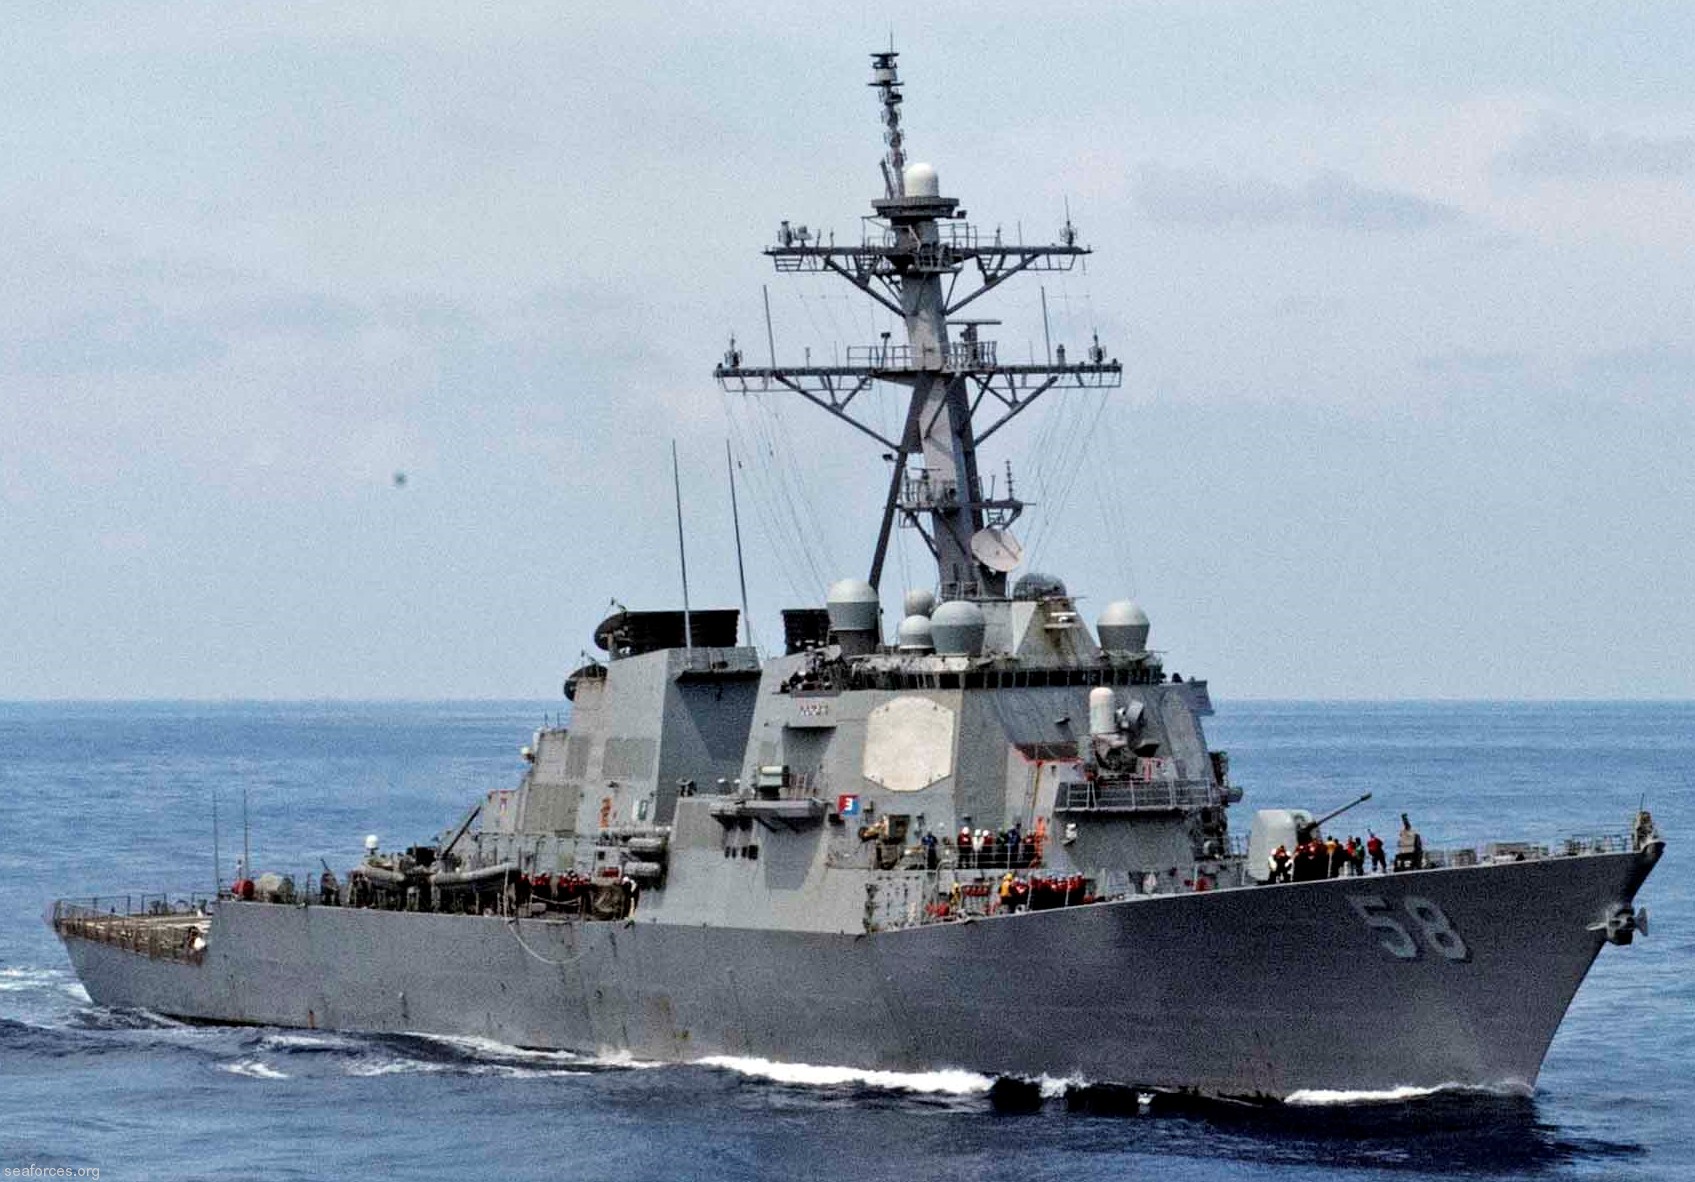 ddg-58 uss laboon guided missile destroyer us navy 29 5th fleet aor